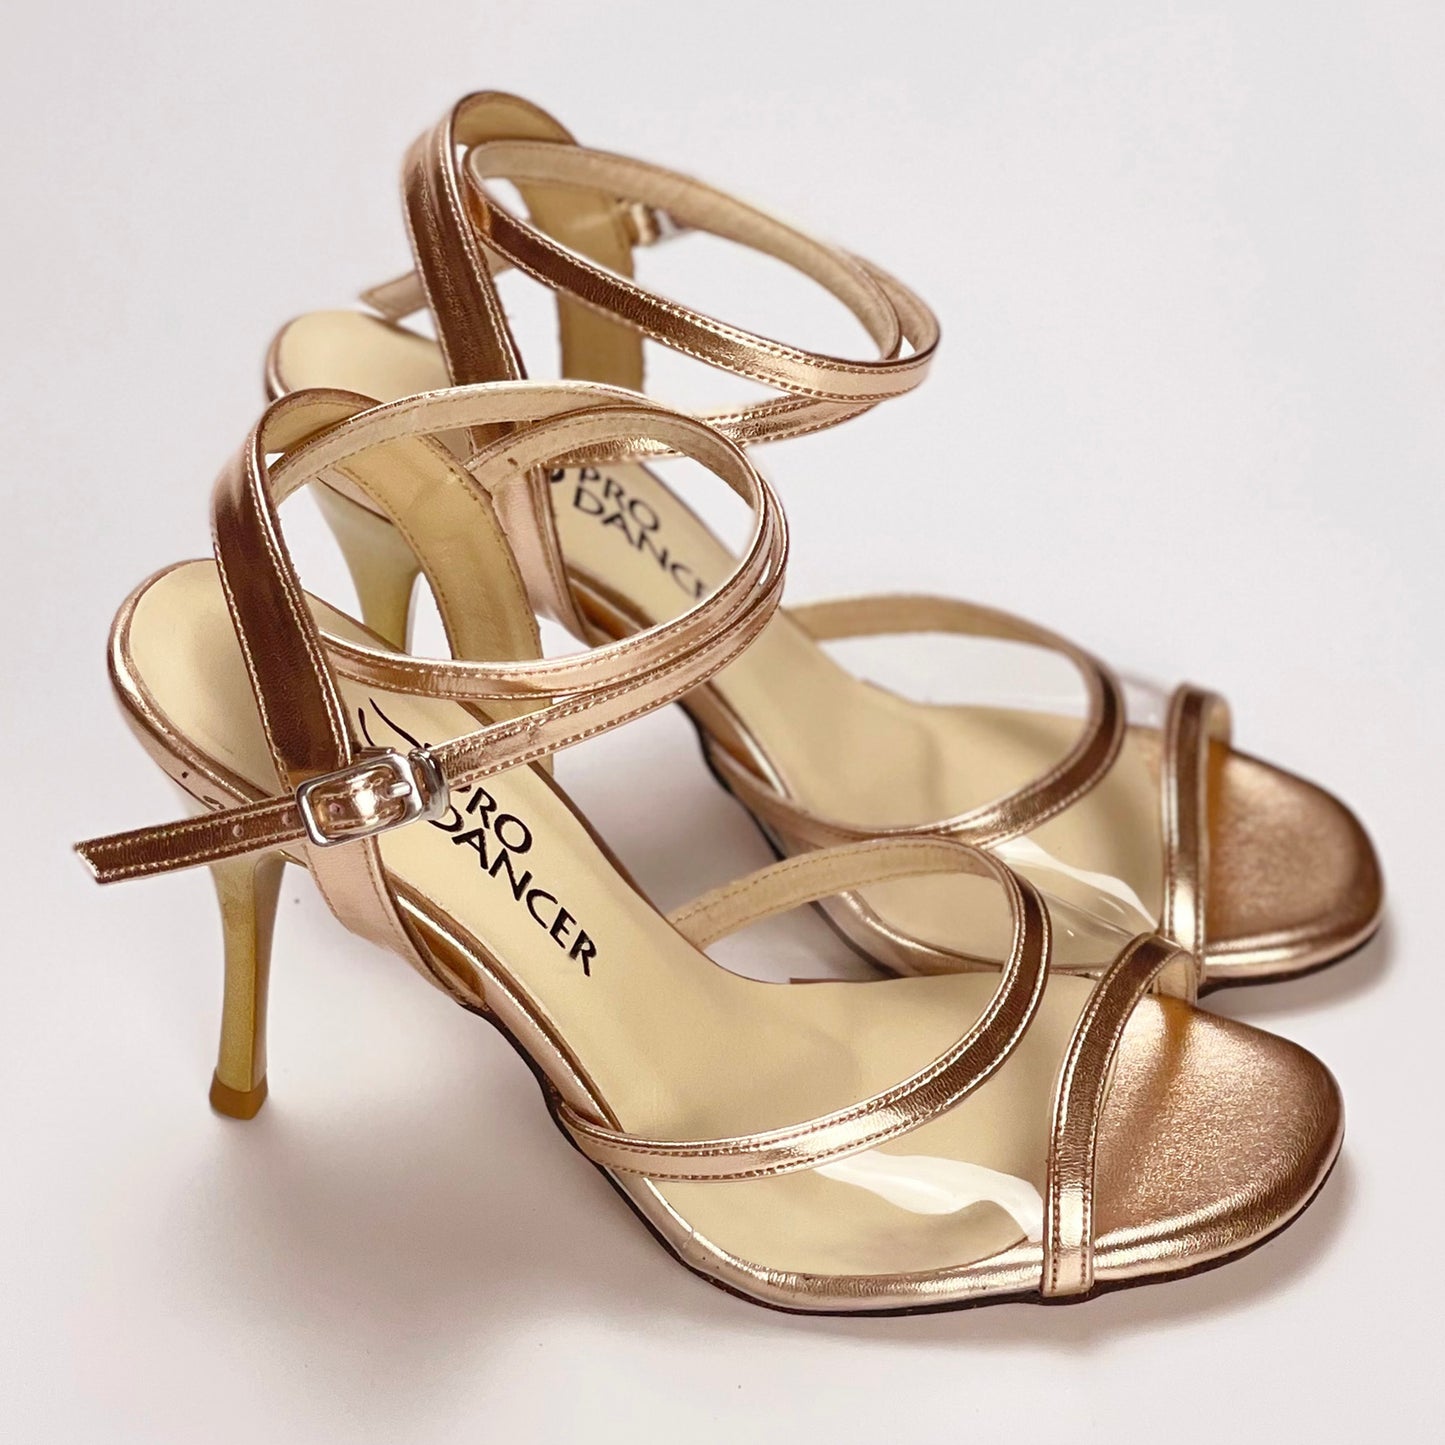 Pro Dancer Tango Argentino Shoes High Heel Dance Sandals Leather Sole Rose Gold (PD-9062A)